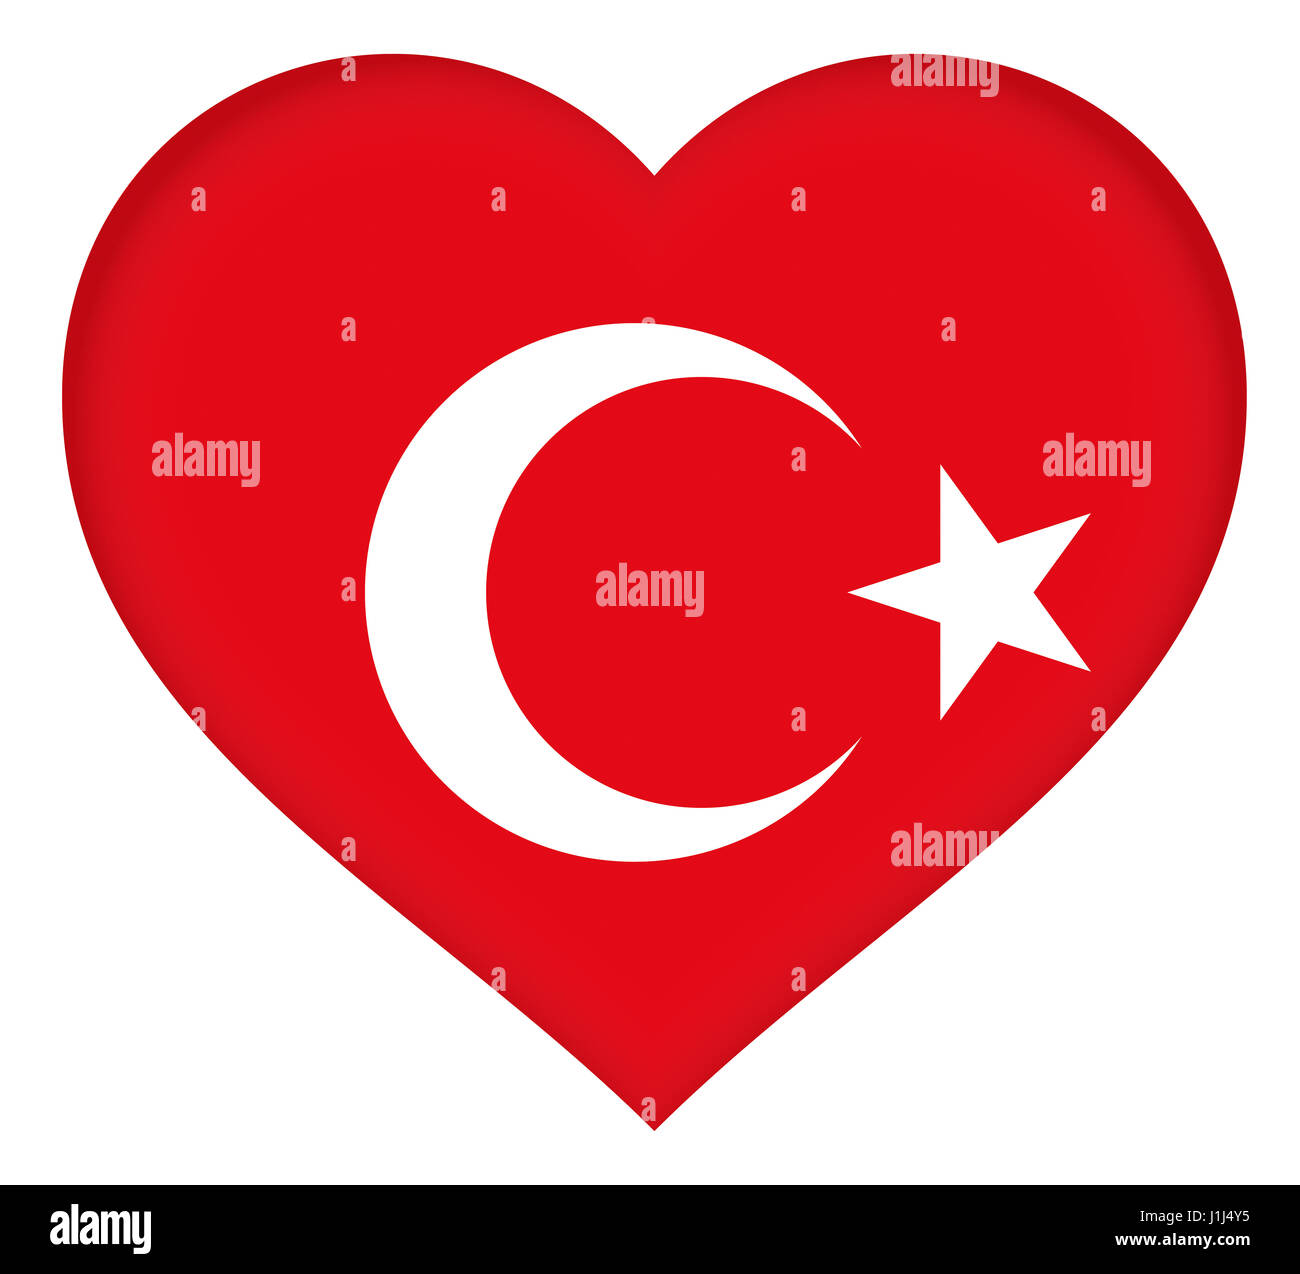 Illustration of the national flag of Turkey shaped like a heart Stock Photo